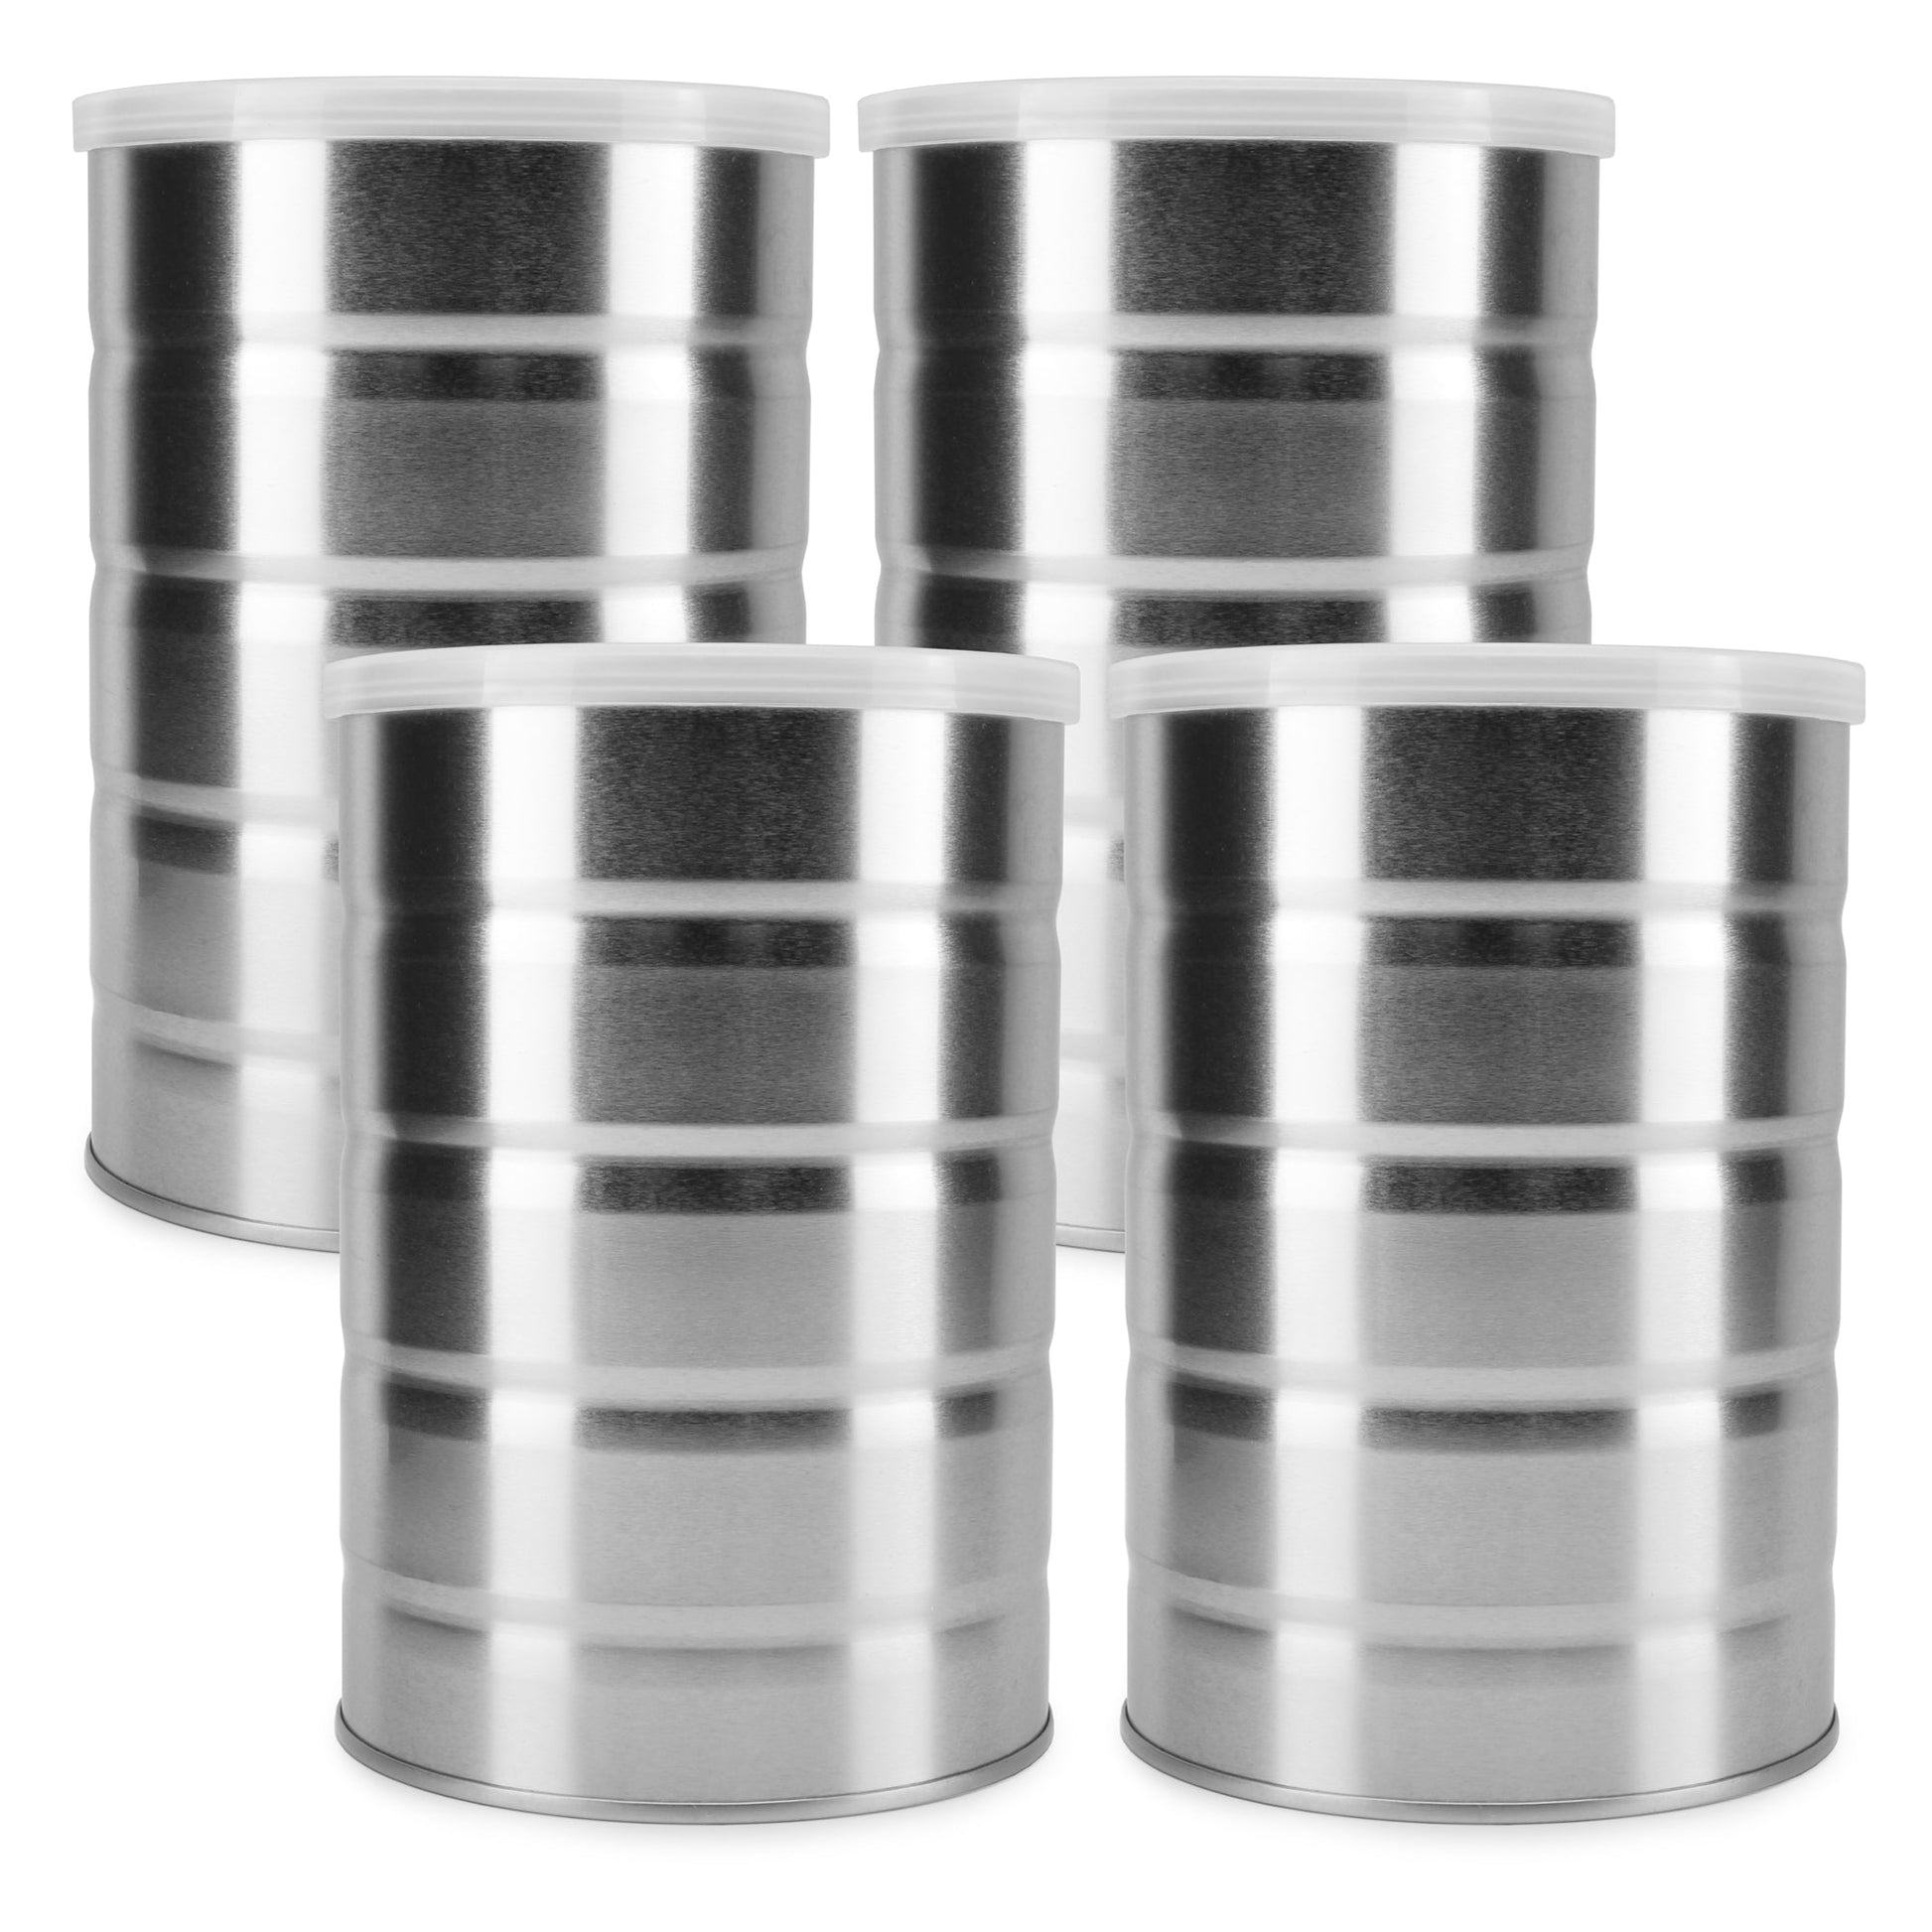 Empty Coffee Cans (Case of 12) - SH_1673_CASE